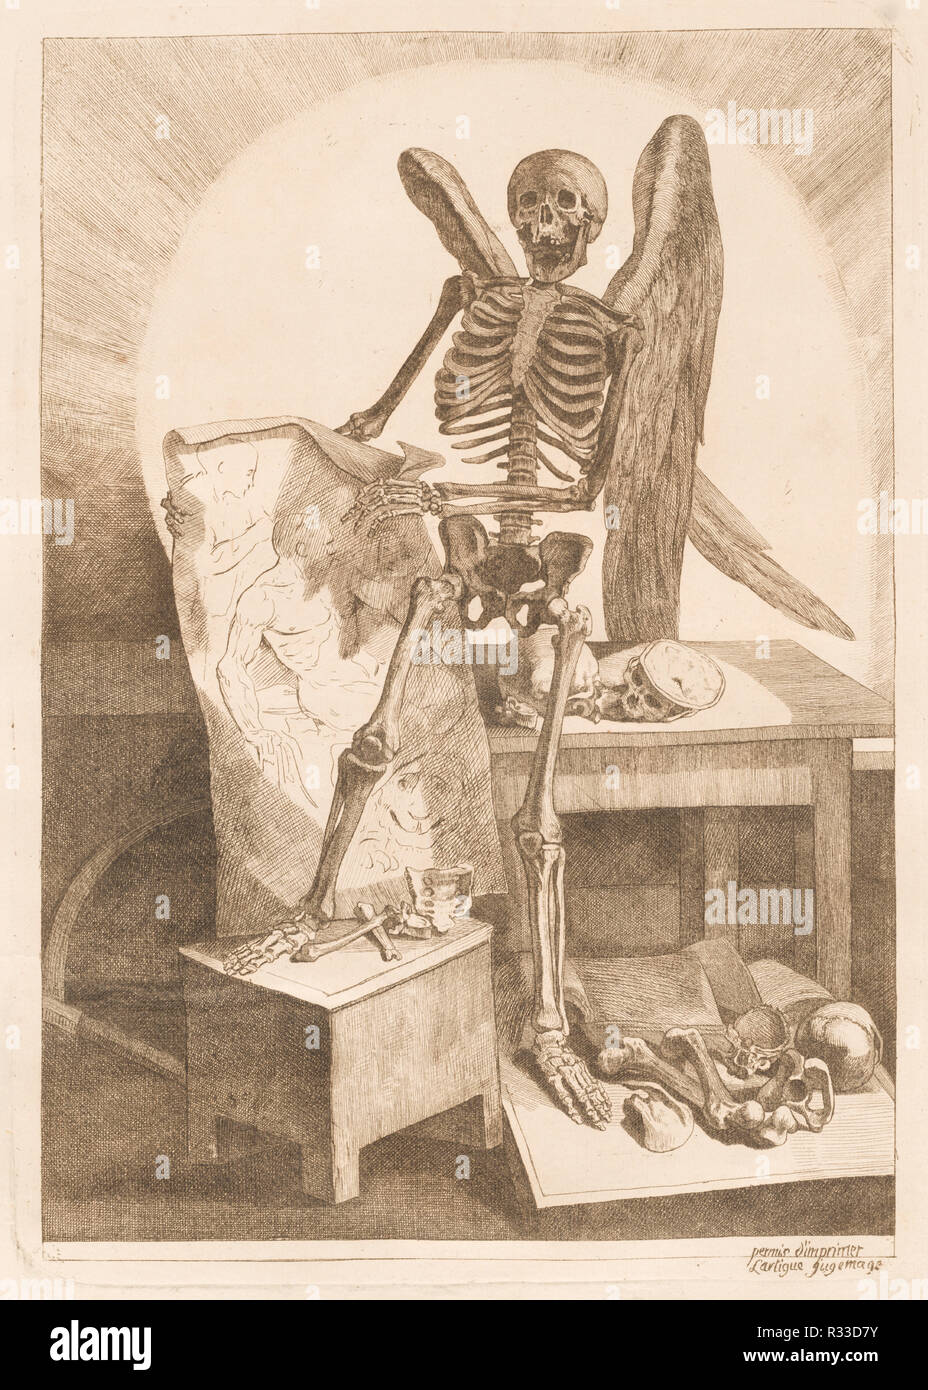 A Winged Skeleton Holding an Anatomical Drawing. Dated: 1779. Dimensions: plate: 35.2 × 25.1 cm (13 7/8 × 9 7/8 in.)  sheet: 52.7 × 39.9 cm (20 3/4 × 15 11/16 in.). Medium: etching and engraving on laid paper. Museum: National Gallery of Art, Washington DC. Author: Jacques Gamelin. Stock Photo